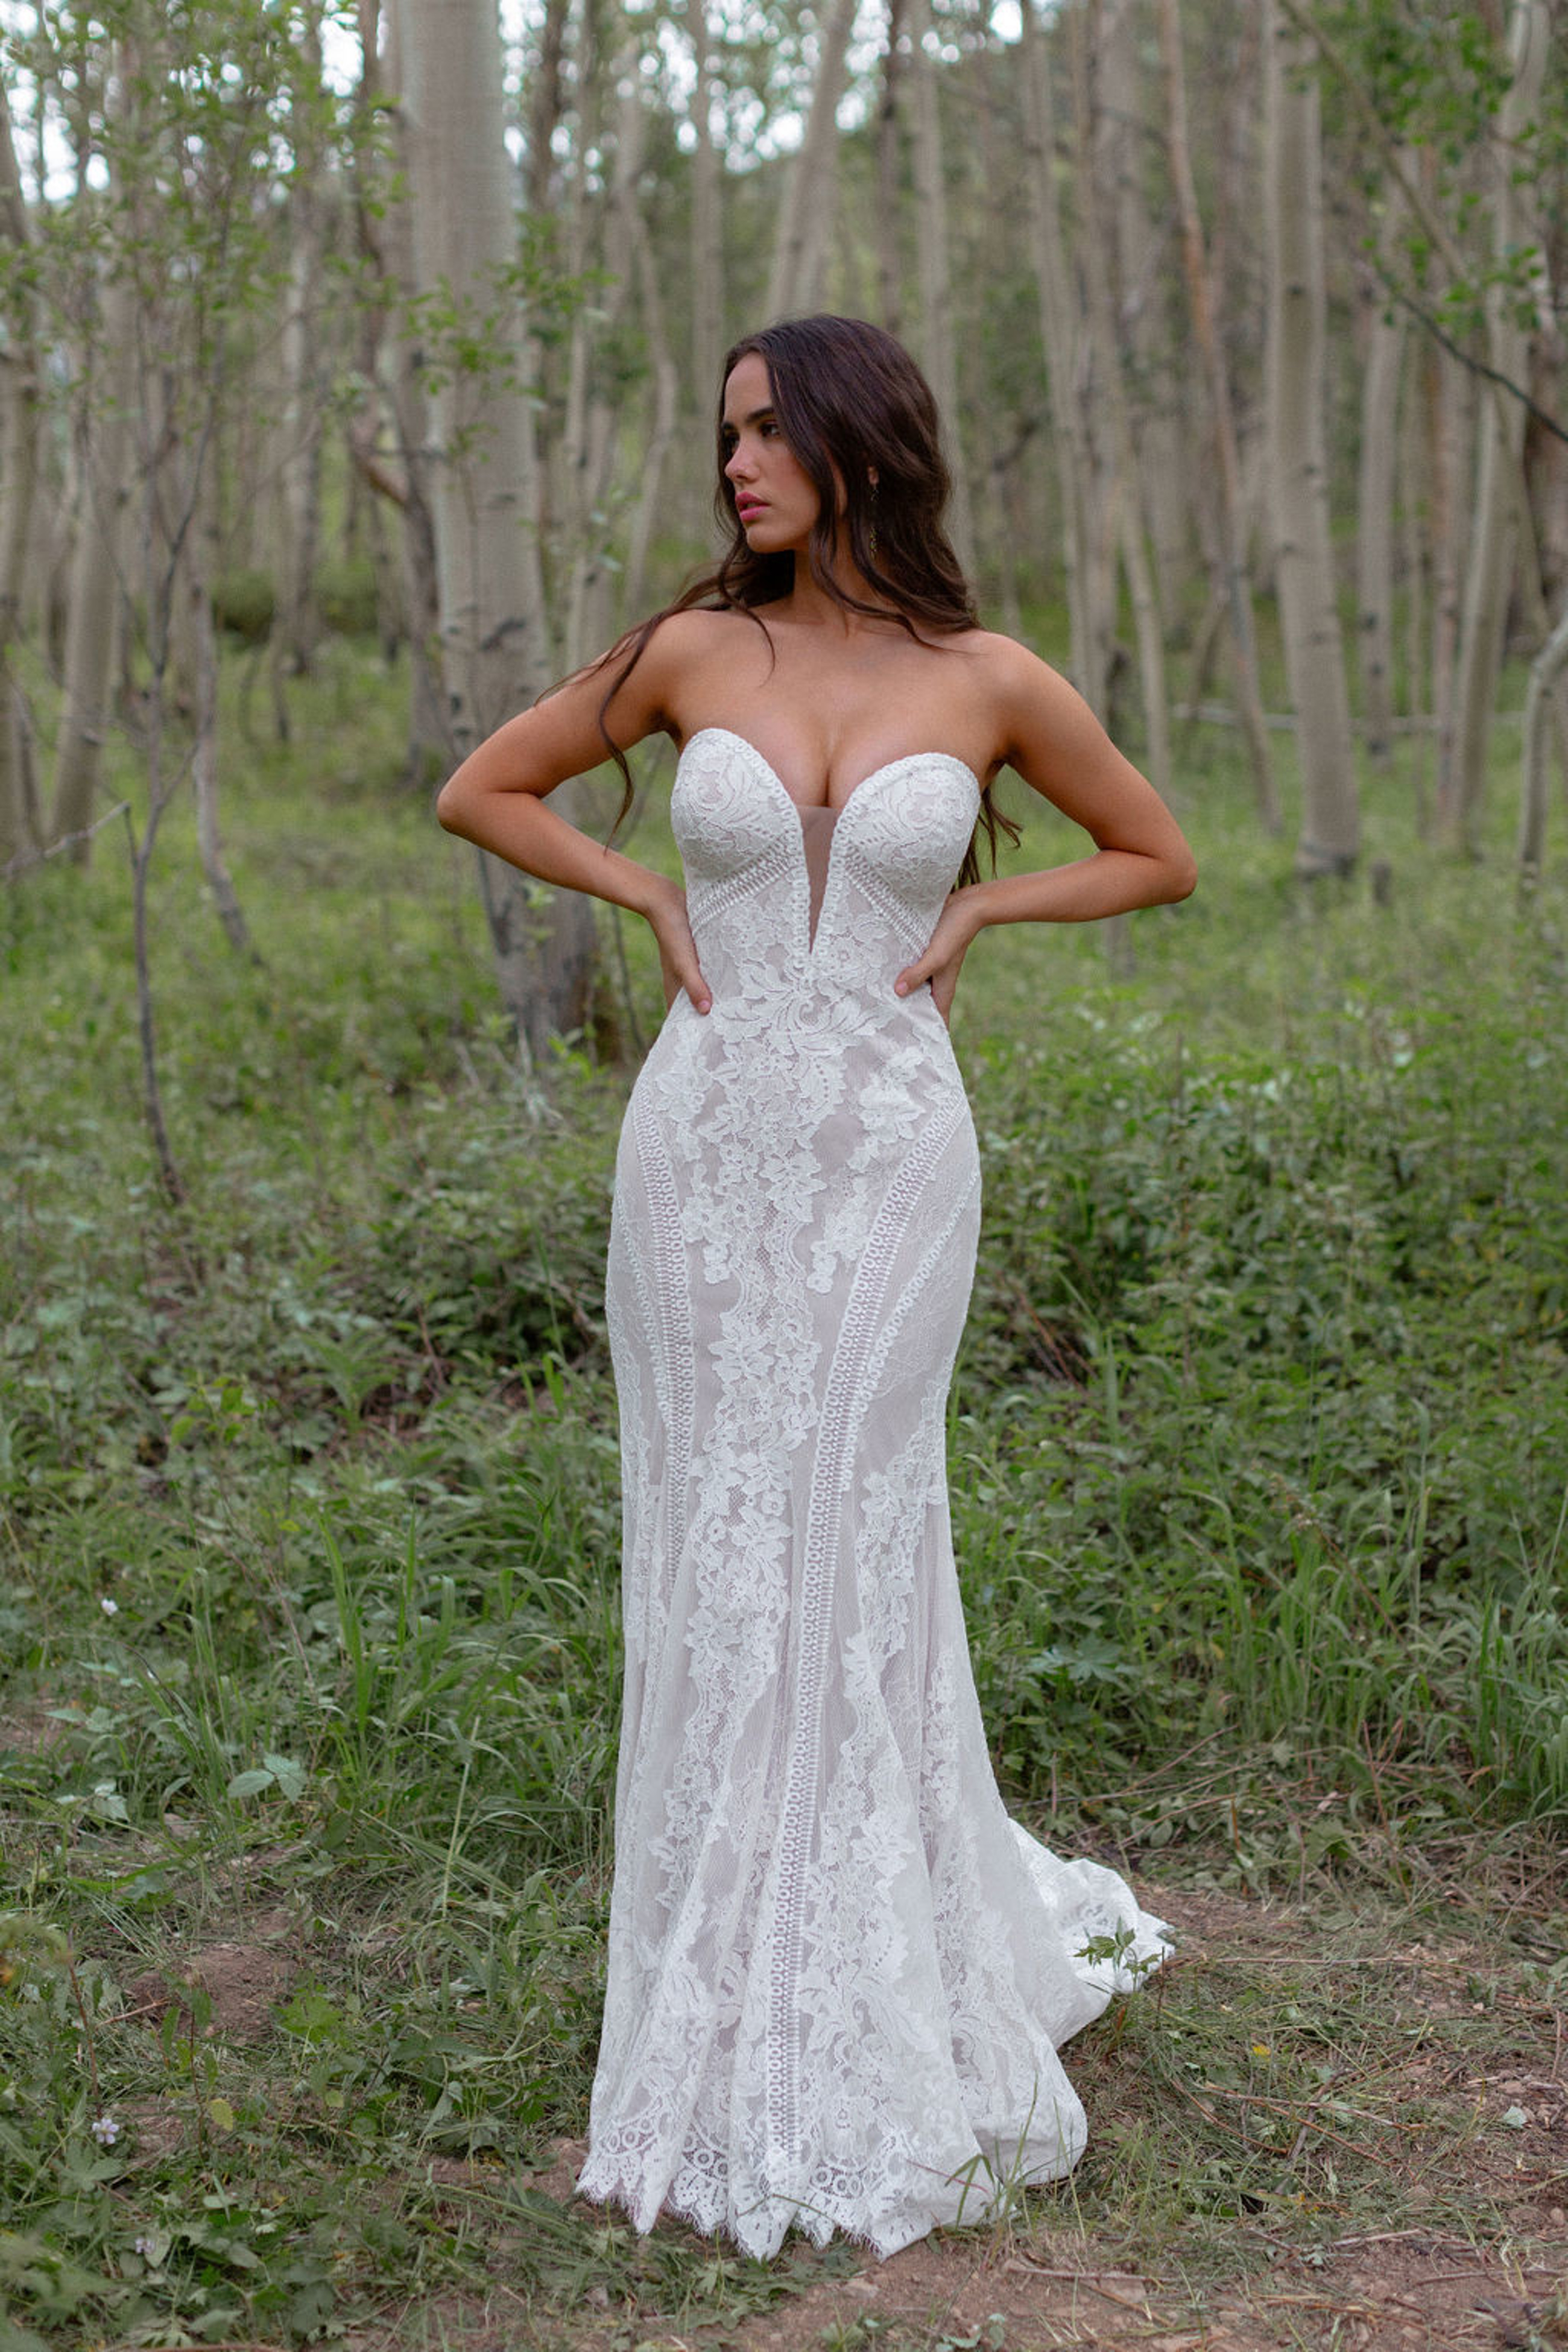 F120 Rory Wilderly Bride Wedding Dress. Call Or Book A Fitting Online!